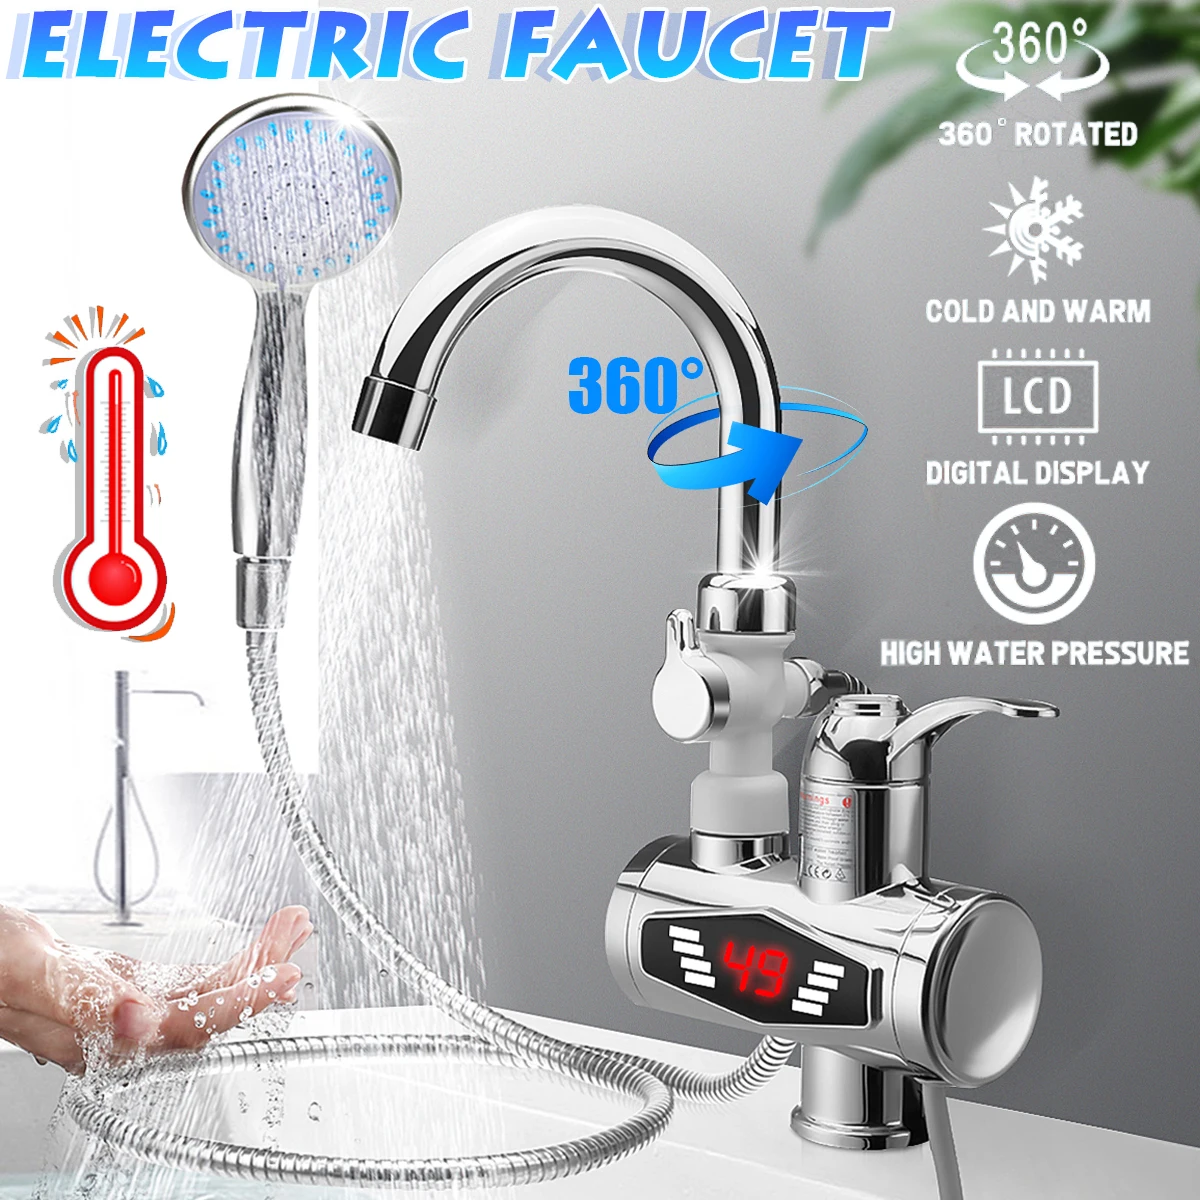 

3000W Stainless Steel Water Heater Faucet Electric Tap With Shower Head 3S Fast Heating Instant Hot Water for Kitchen Bathroom